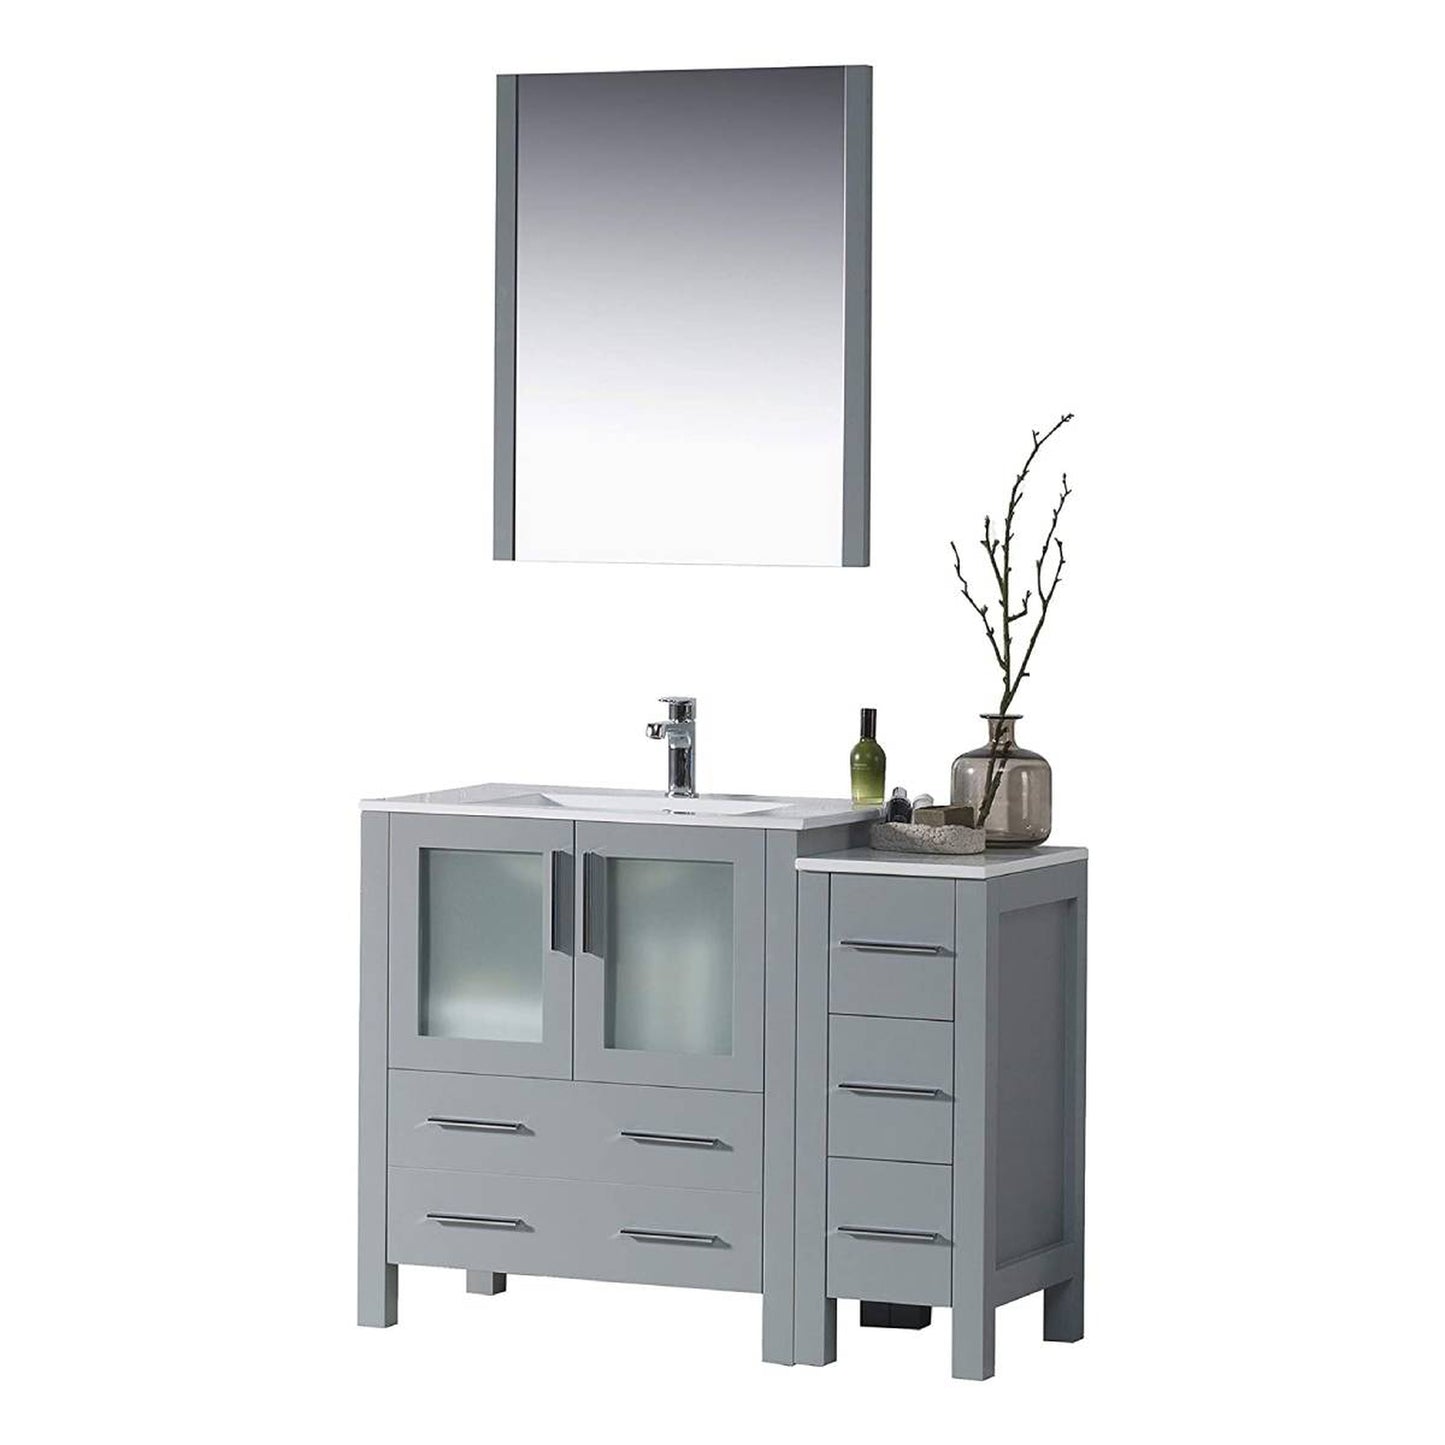 Blossom Sydney 42" Metal Gray Freestanding Vanity Set With Integrated Single Sink Ceramic Top, Mirror and Side Cabinet